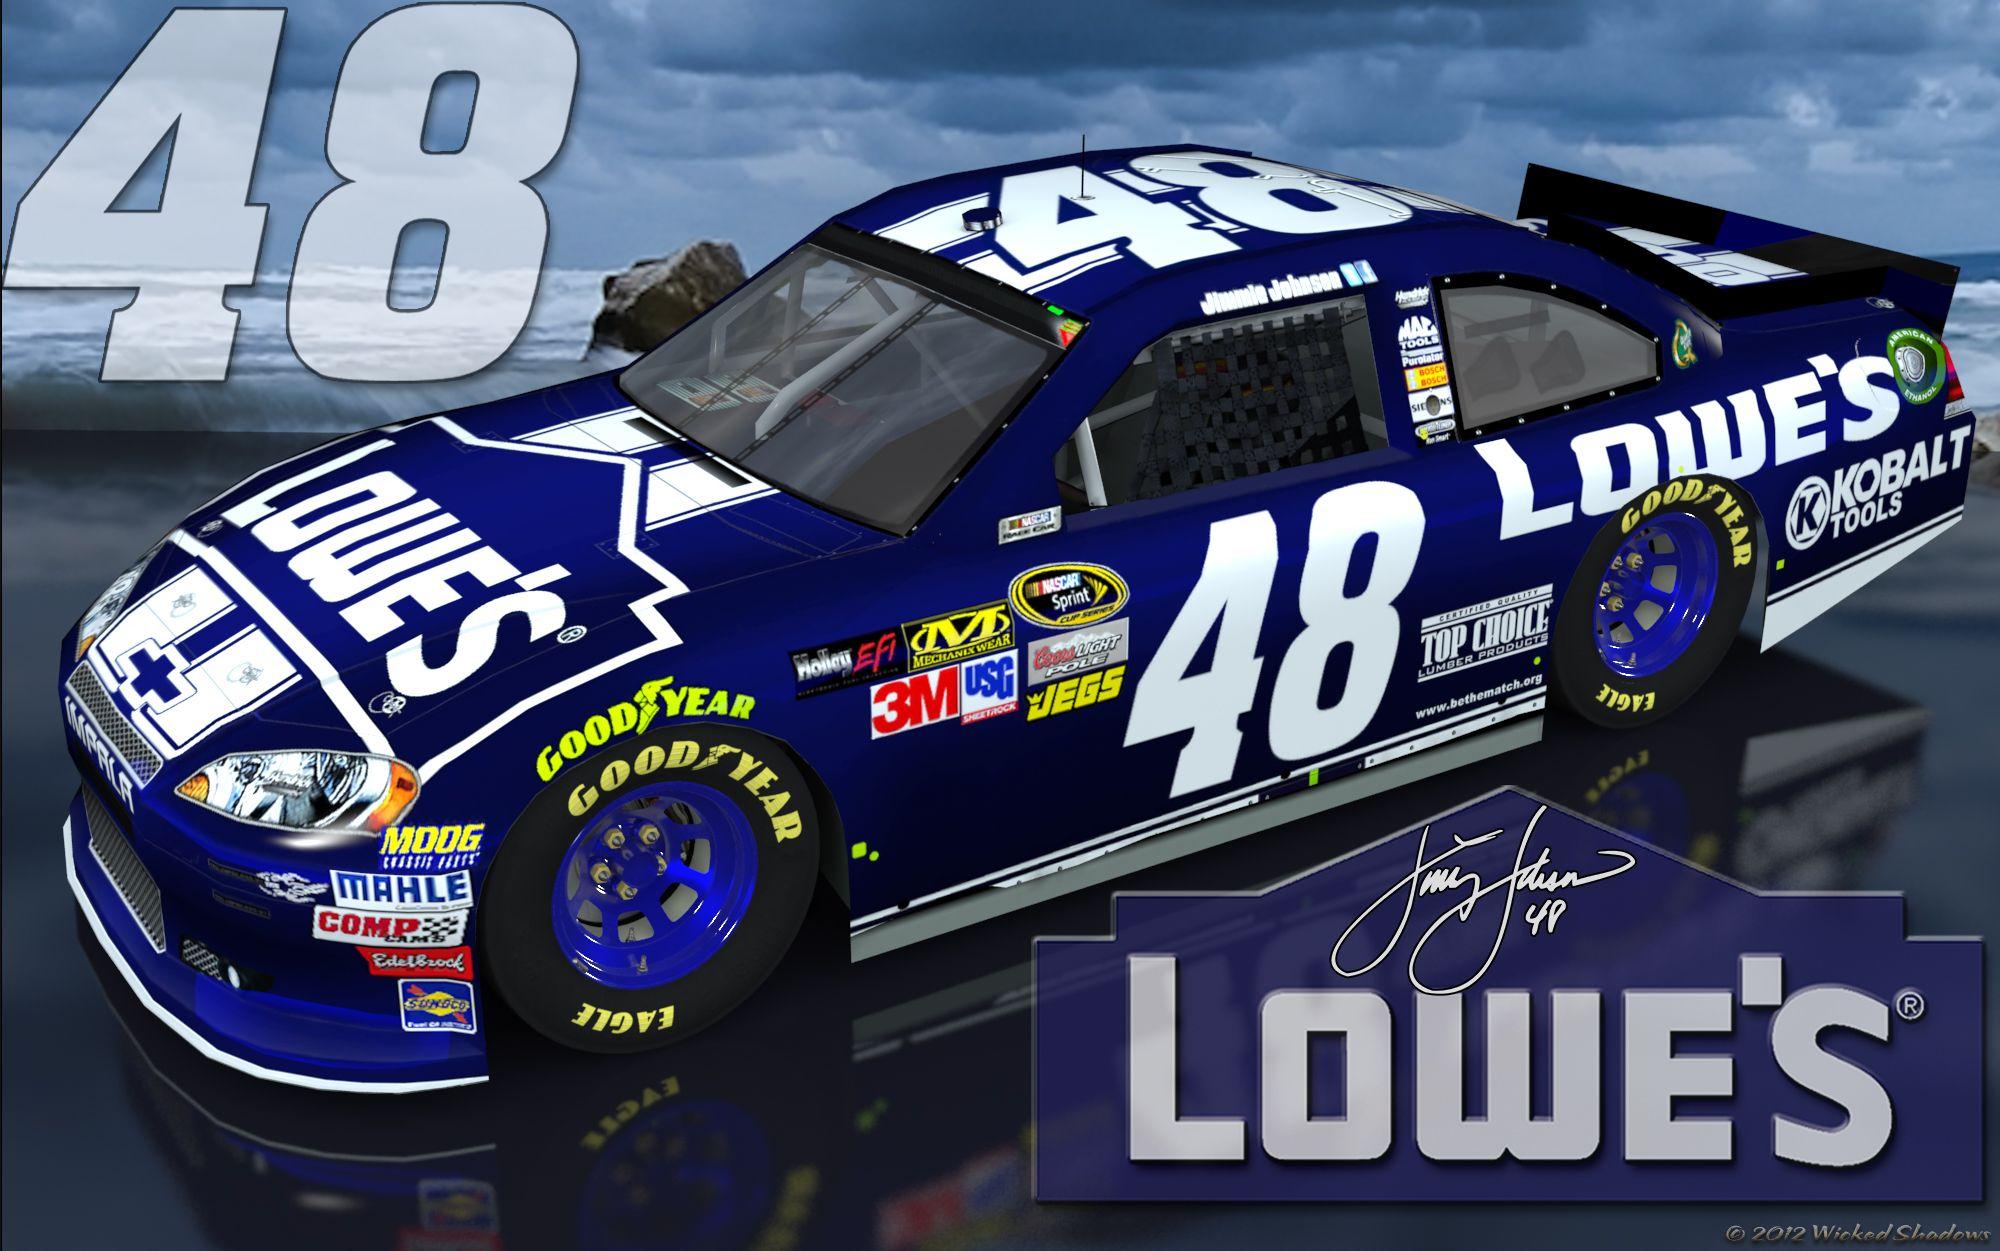 Wallpaper By Wicked Shadows: Jimmie Johnson Lowes 48 Brighter